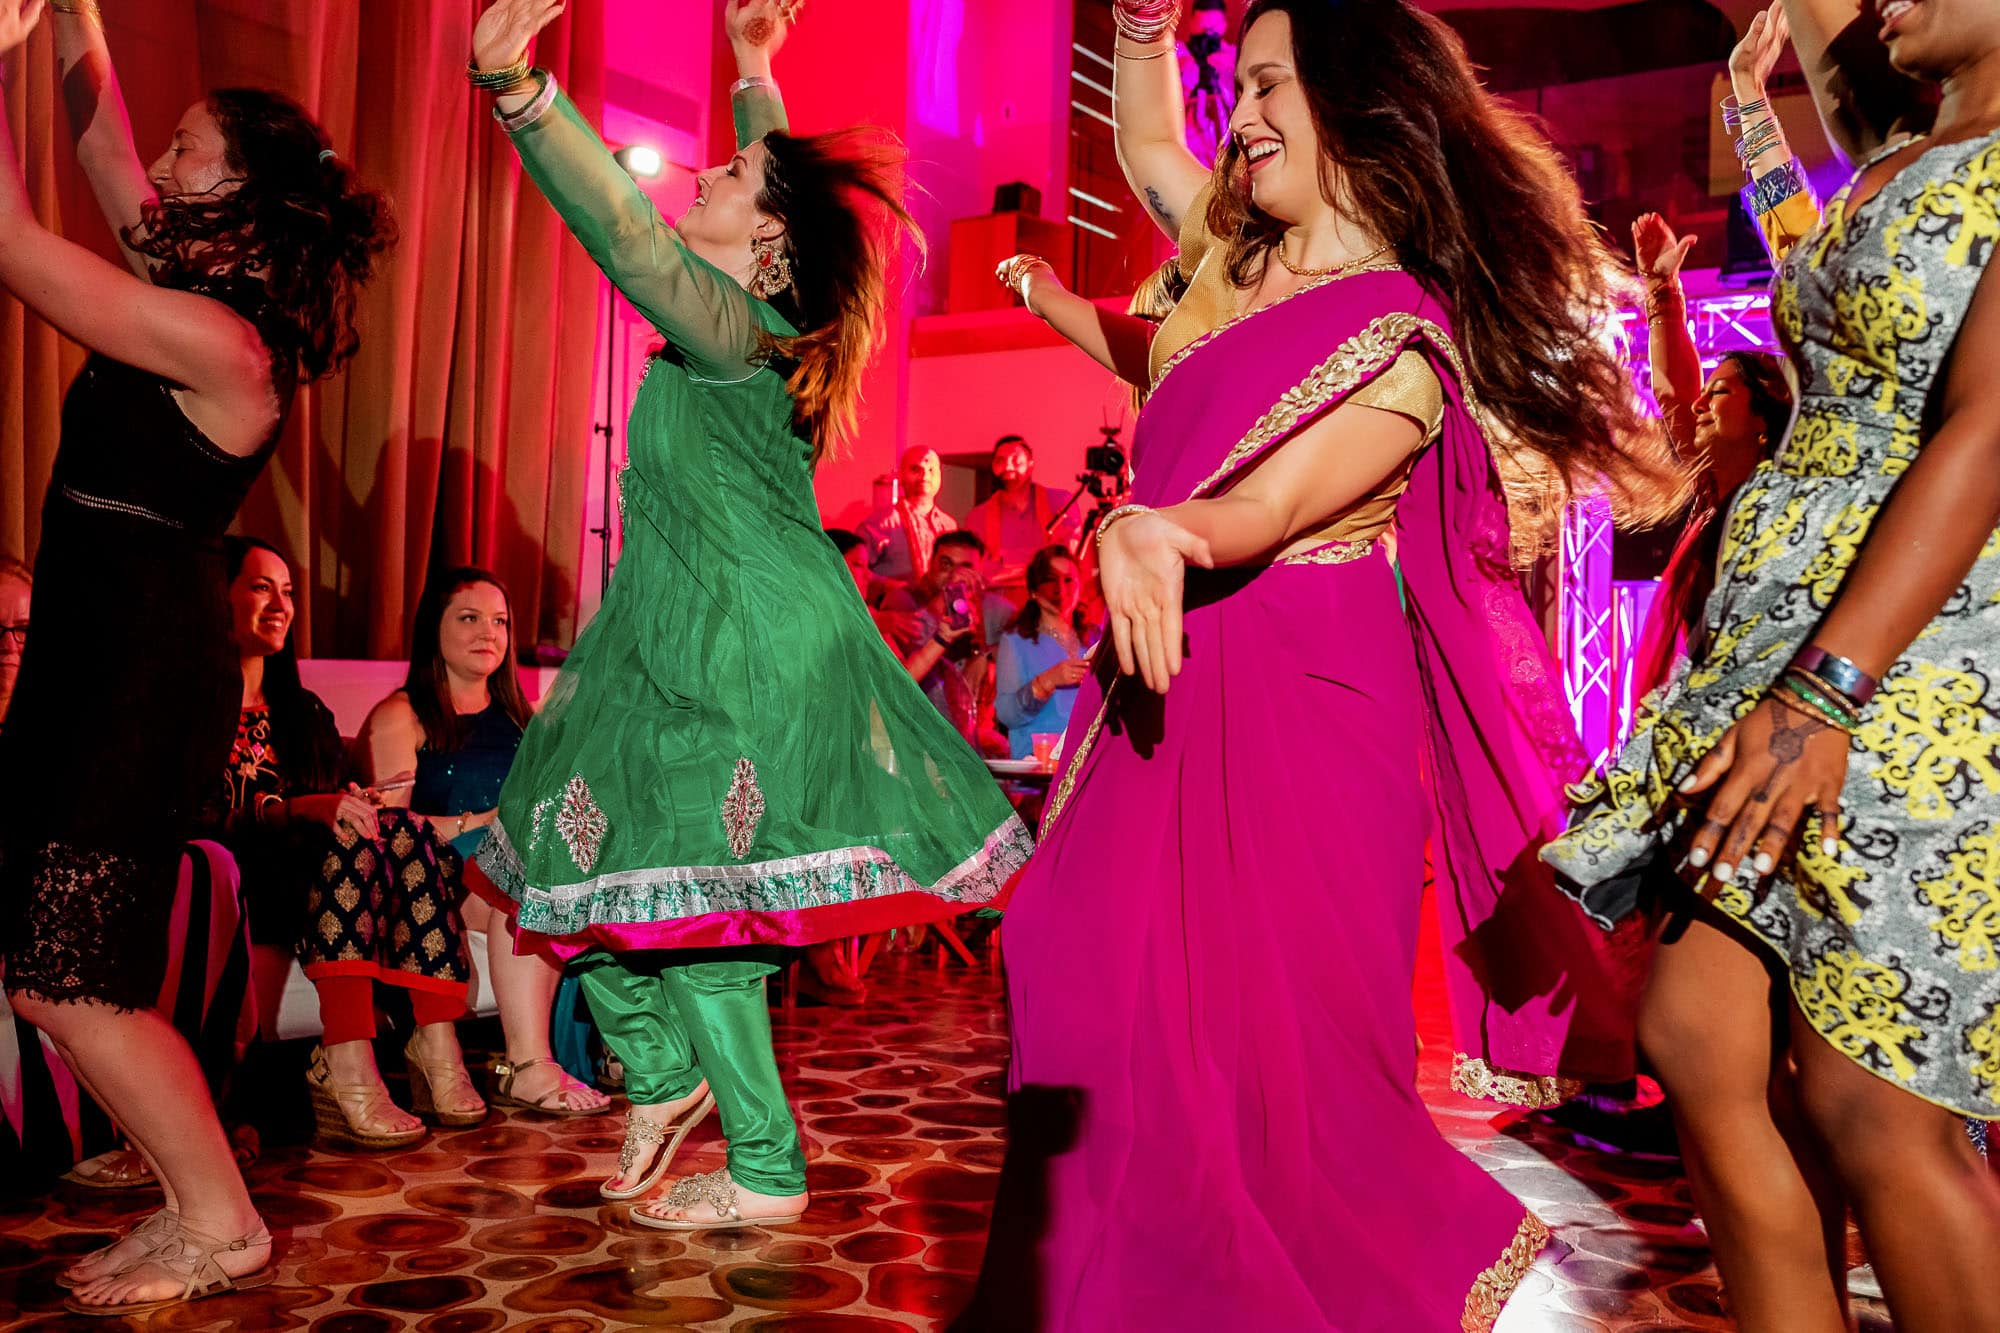 More fun and dancing the second night at this traditional Hindu Muslim wedding!